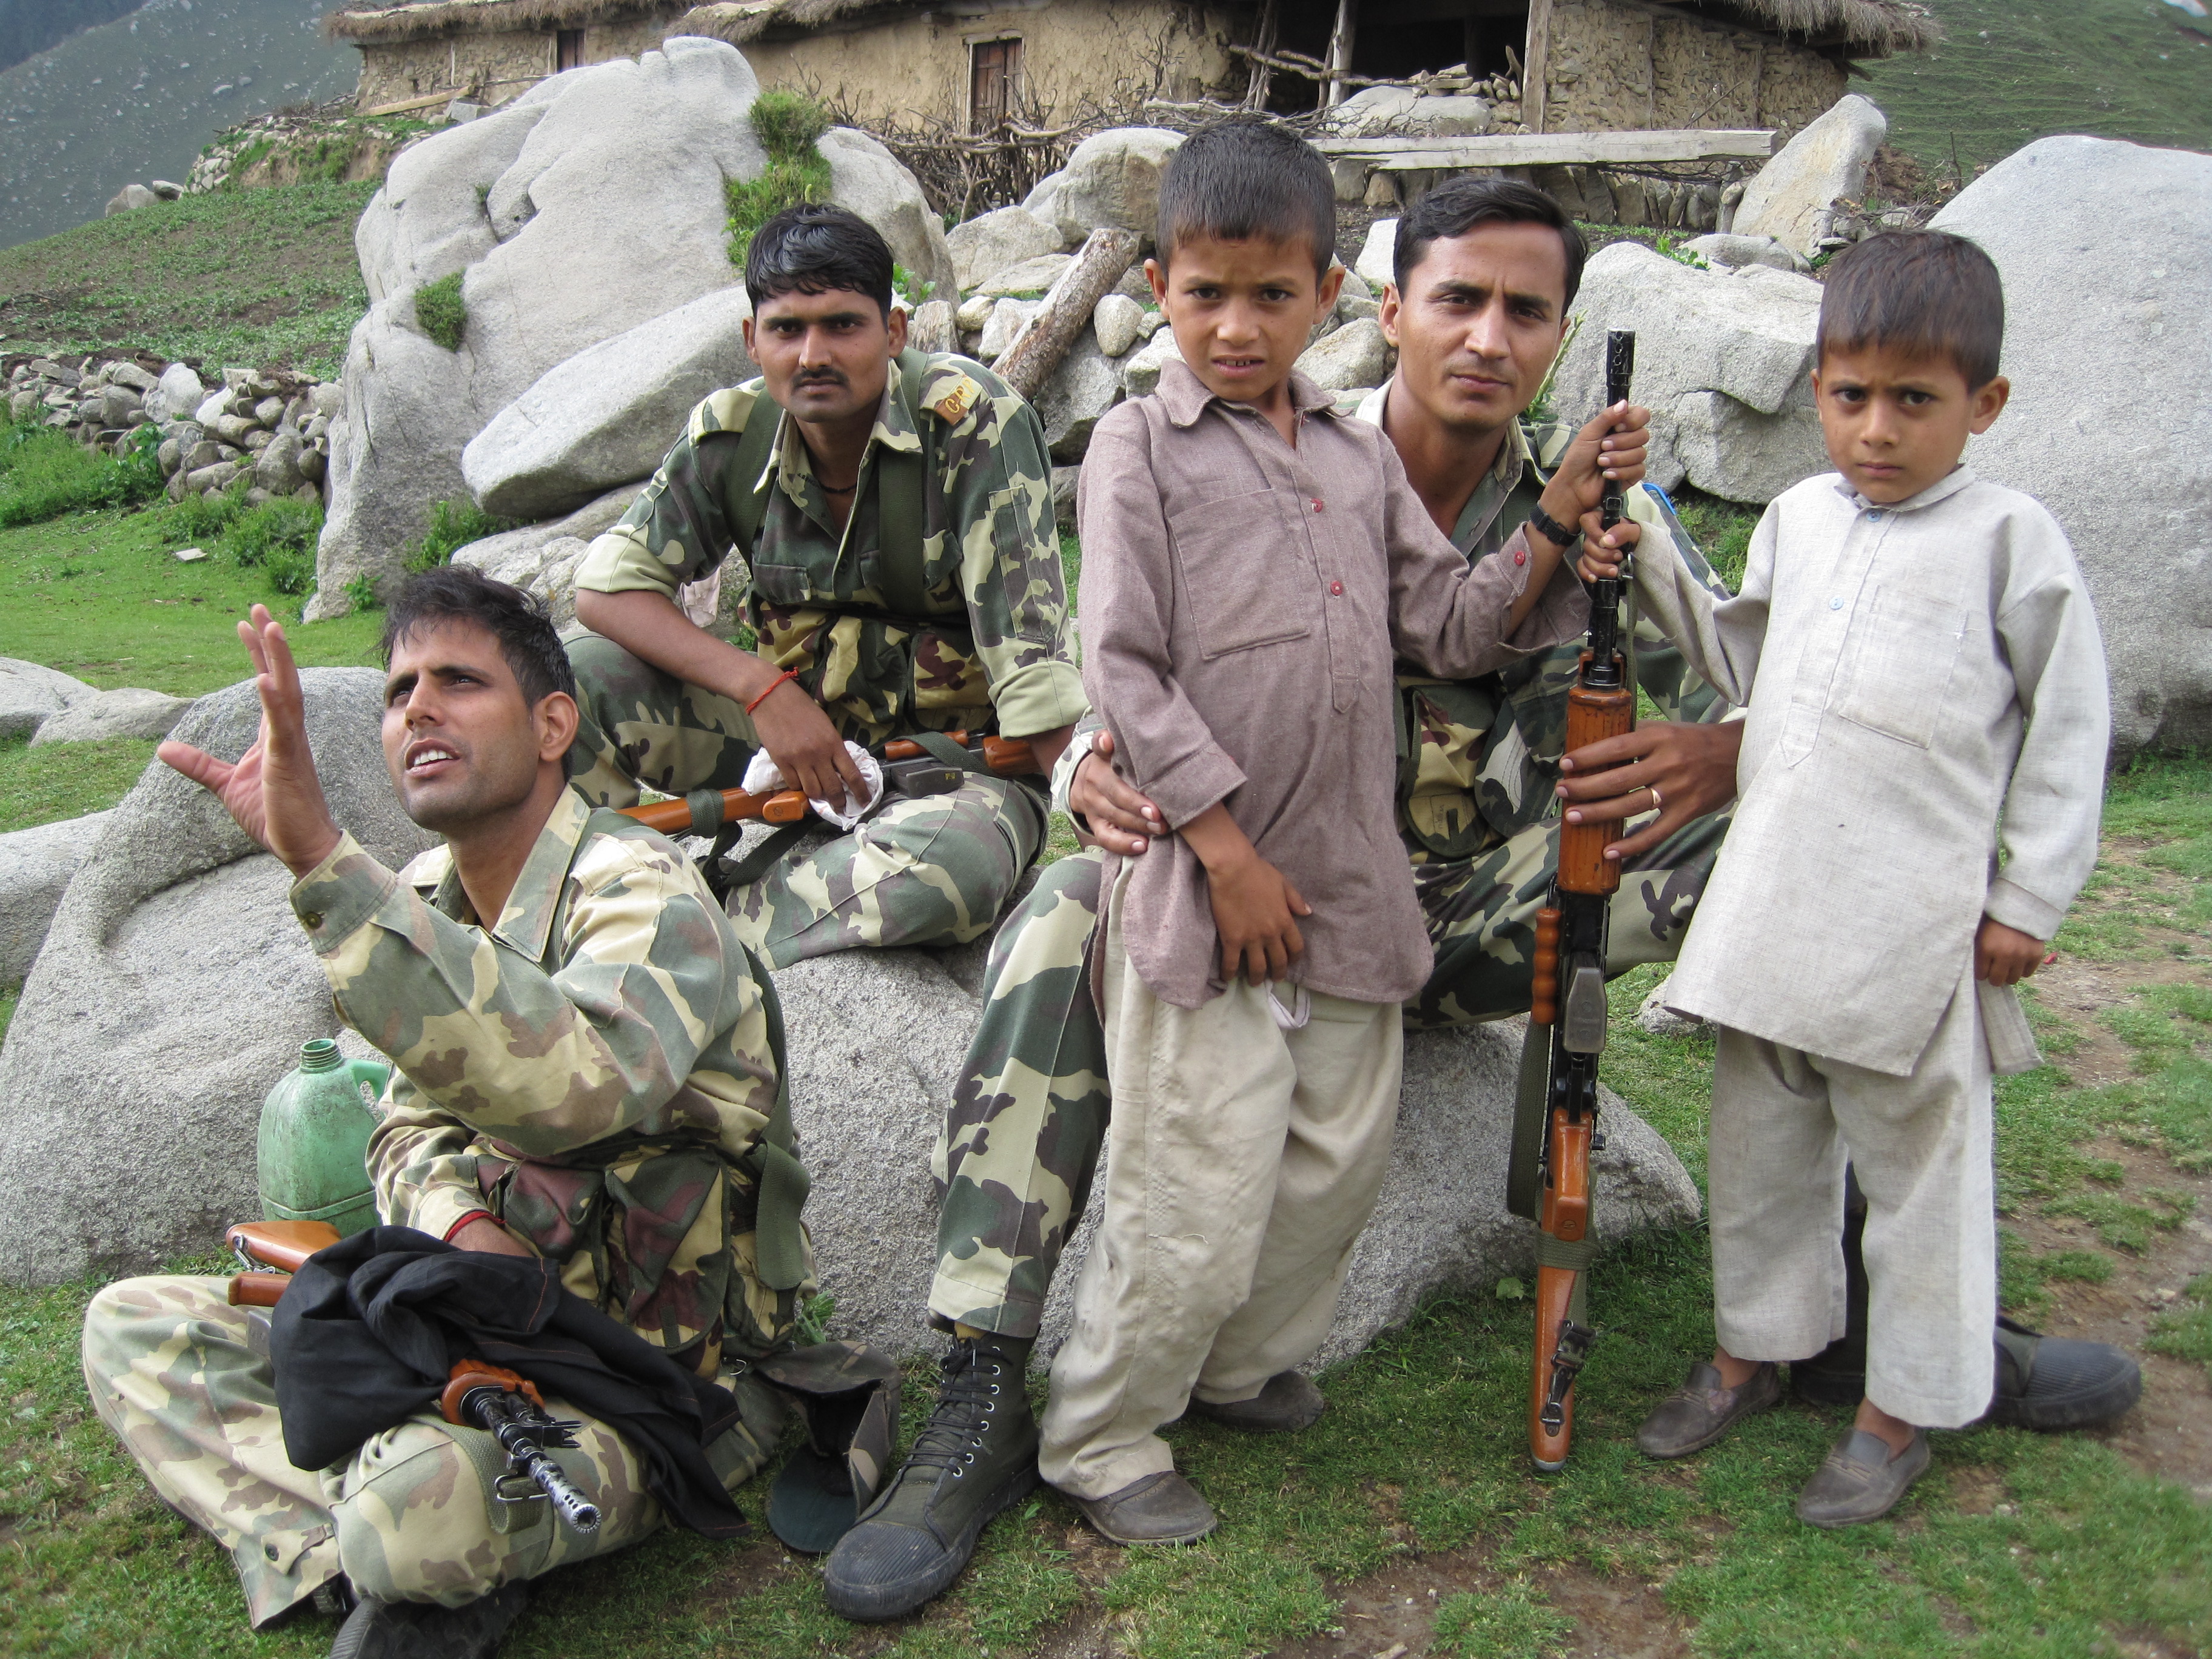 CRPF soldiers with children in Kathua District, J&K. The CRPF has been the lone dissenter of the raise in retirement age proposal, arguing that it needs to keep its age profile young, due its heavy occupation in various combat theatres within and outside the country